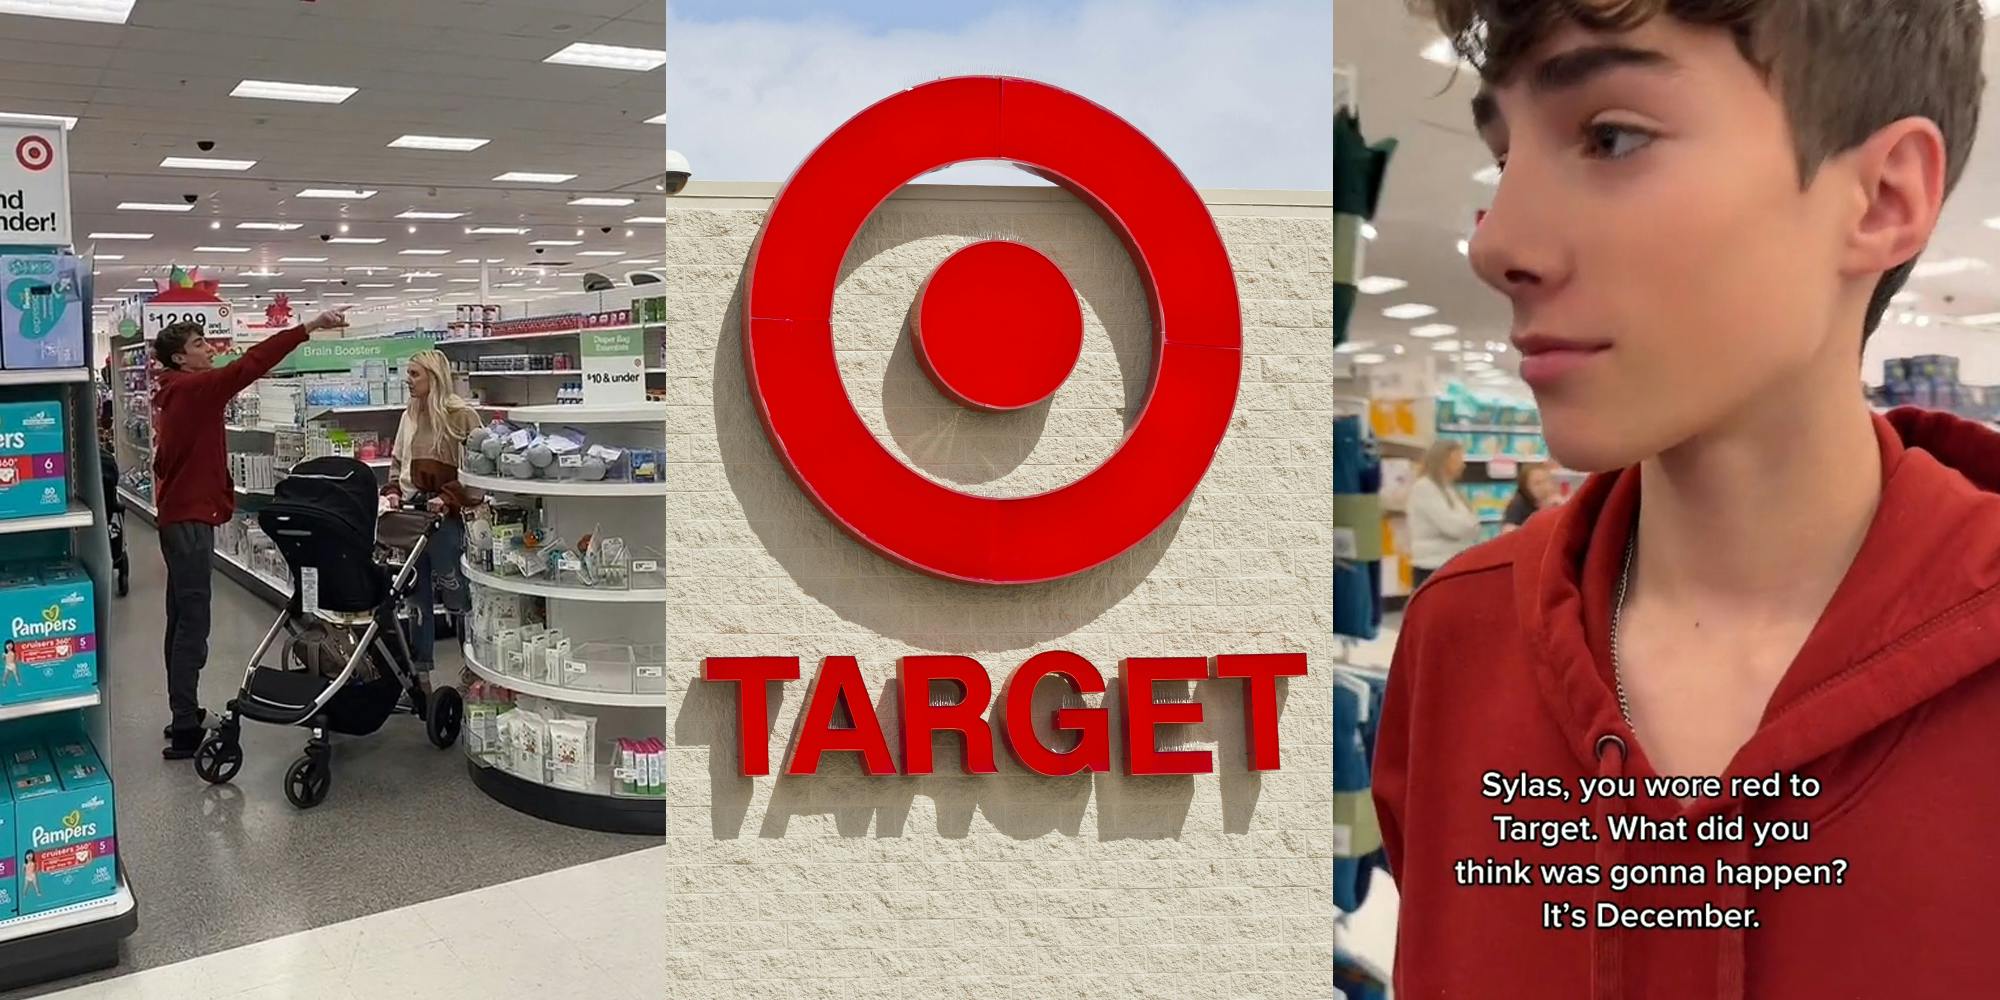 man pointing finger while speaking to woman in Target (l) Target sign on building (c) man in red hoodie at Target caption "Sylas, you wore red to Target. What did you think was gonna happen? It's December" (r)